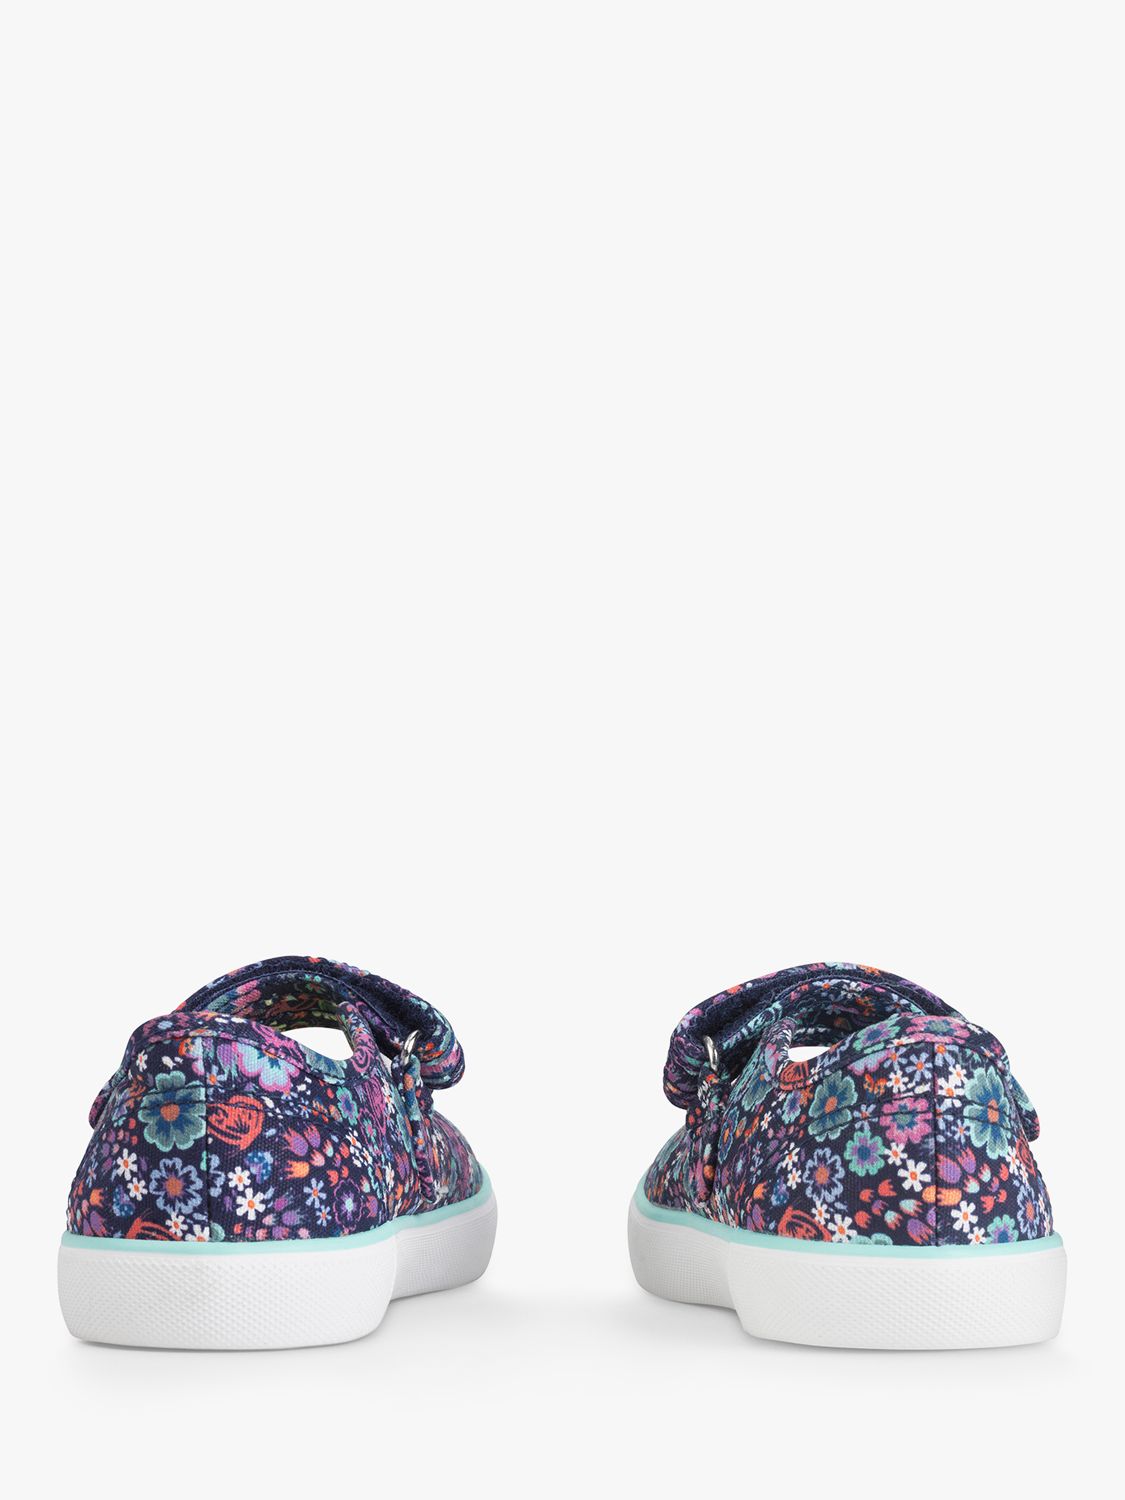 Start-Rite Kids' Busy Lizzie Floral Print Canvas Shoes, Navy/Multi, 7.5F Jnr